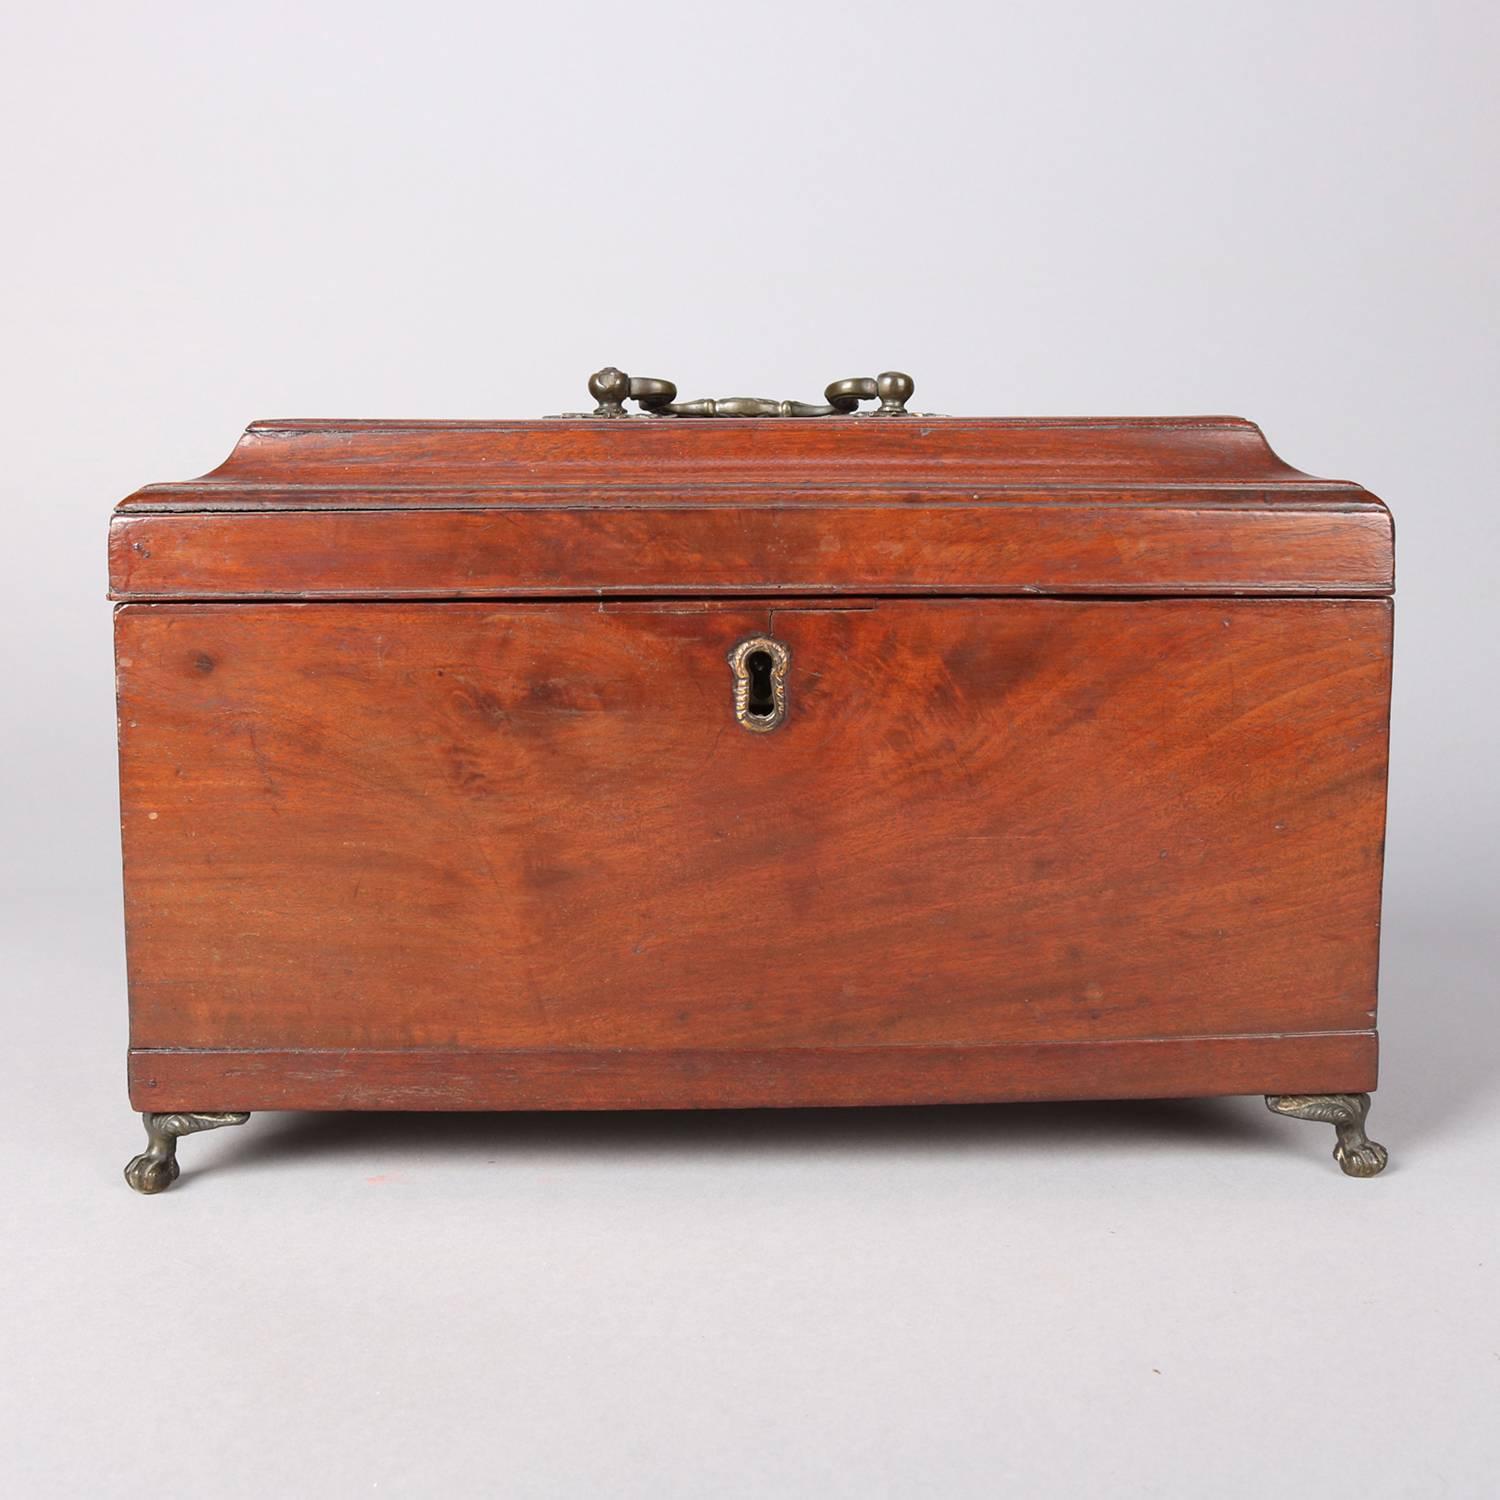 Antique English Regency mahogany tea caddy seated on cast bronze claw and ball feet opens to reveal three interior lidded compartments, 18th century

Measures - 8.25